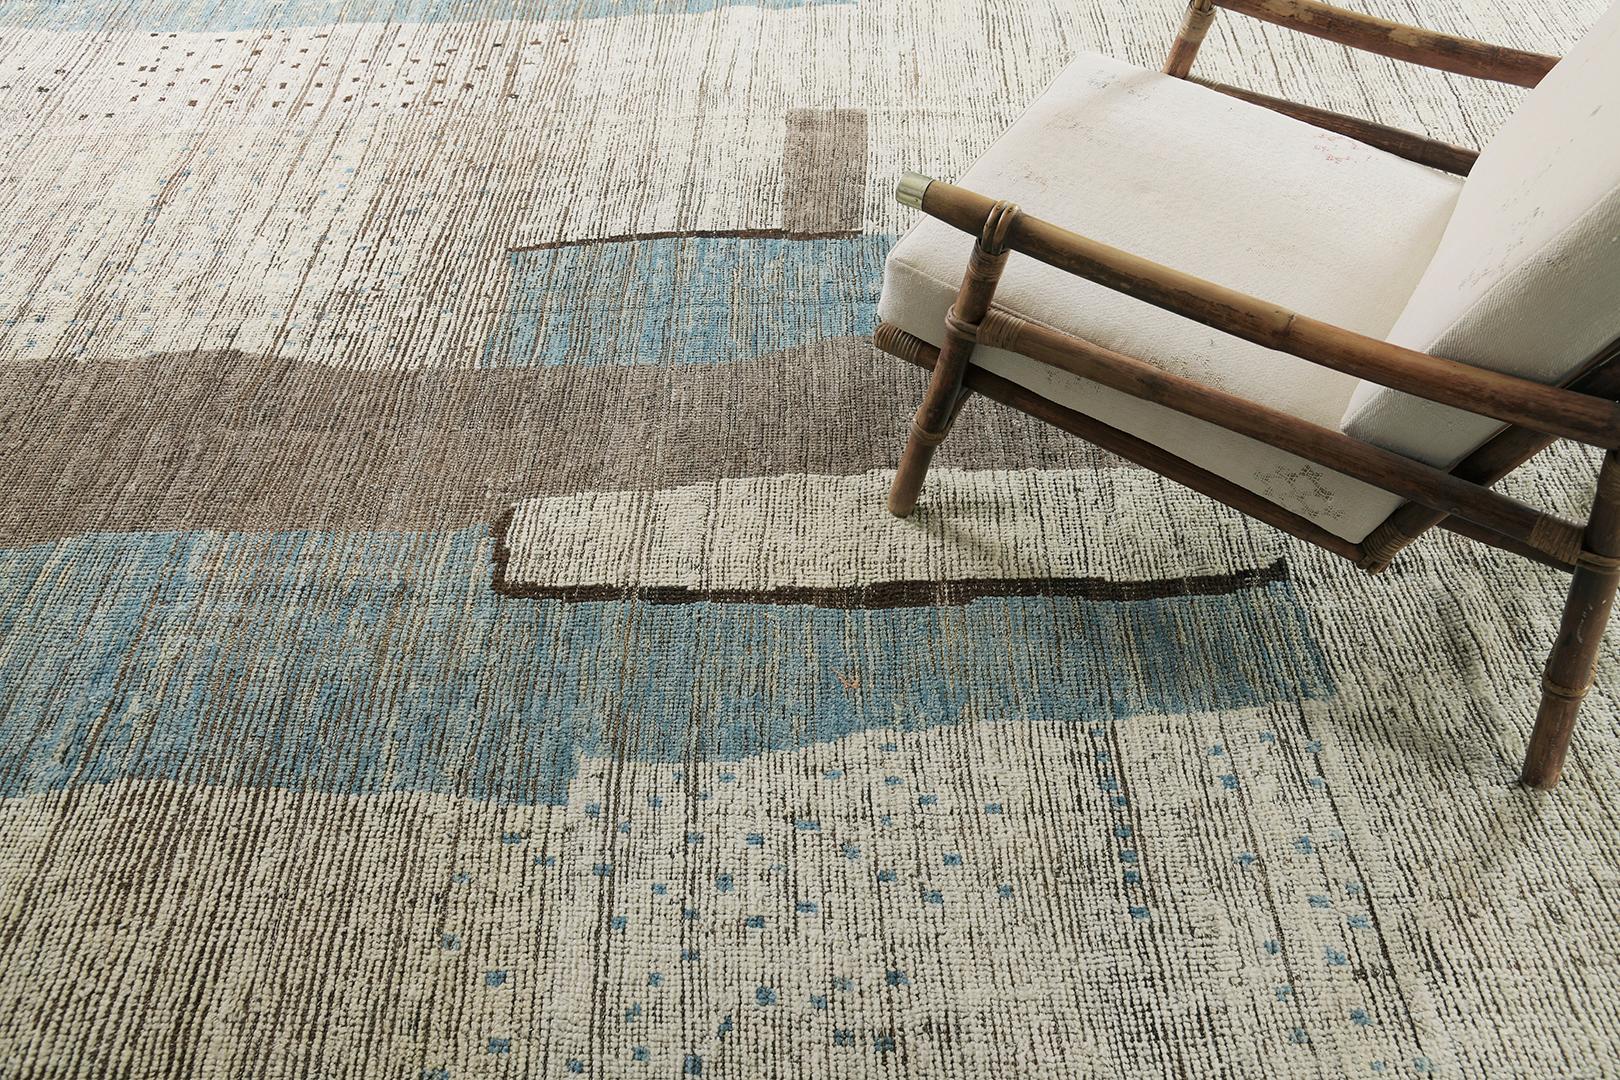 Berm’ forms an artistic approach that brings serenity and relaxation to the viewer’s eyes. Featuring the natural earth tone colour scheme, this exquisite rug plays along the sophisticated subtle texture that it brings to any space. Mehraban's Atlas